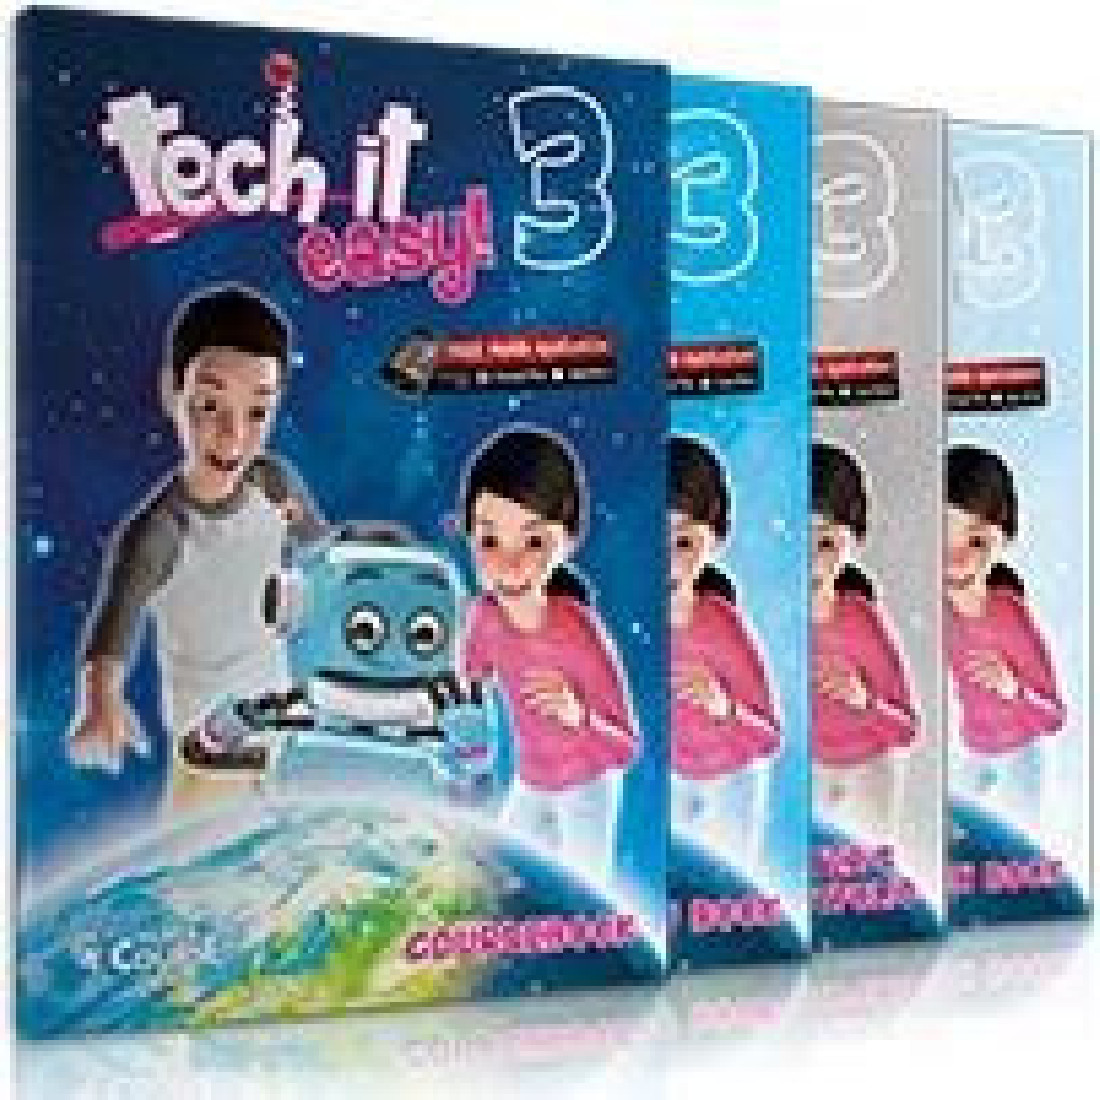 TECH IT EASY 3 ΠΑΚΕΤΟ ΜΕ I-BOOK + REVISION BOOK ME CD